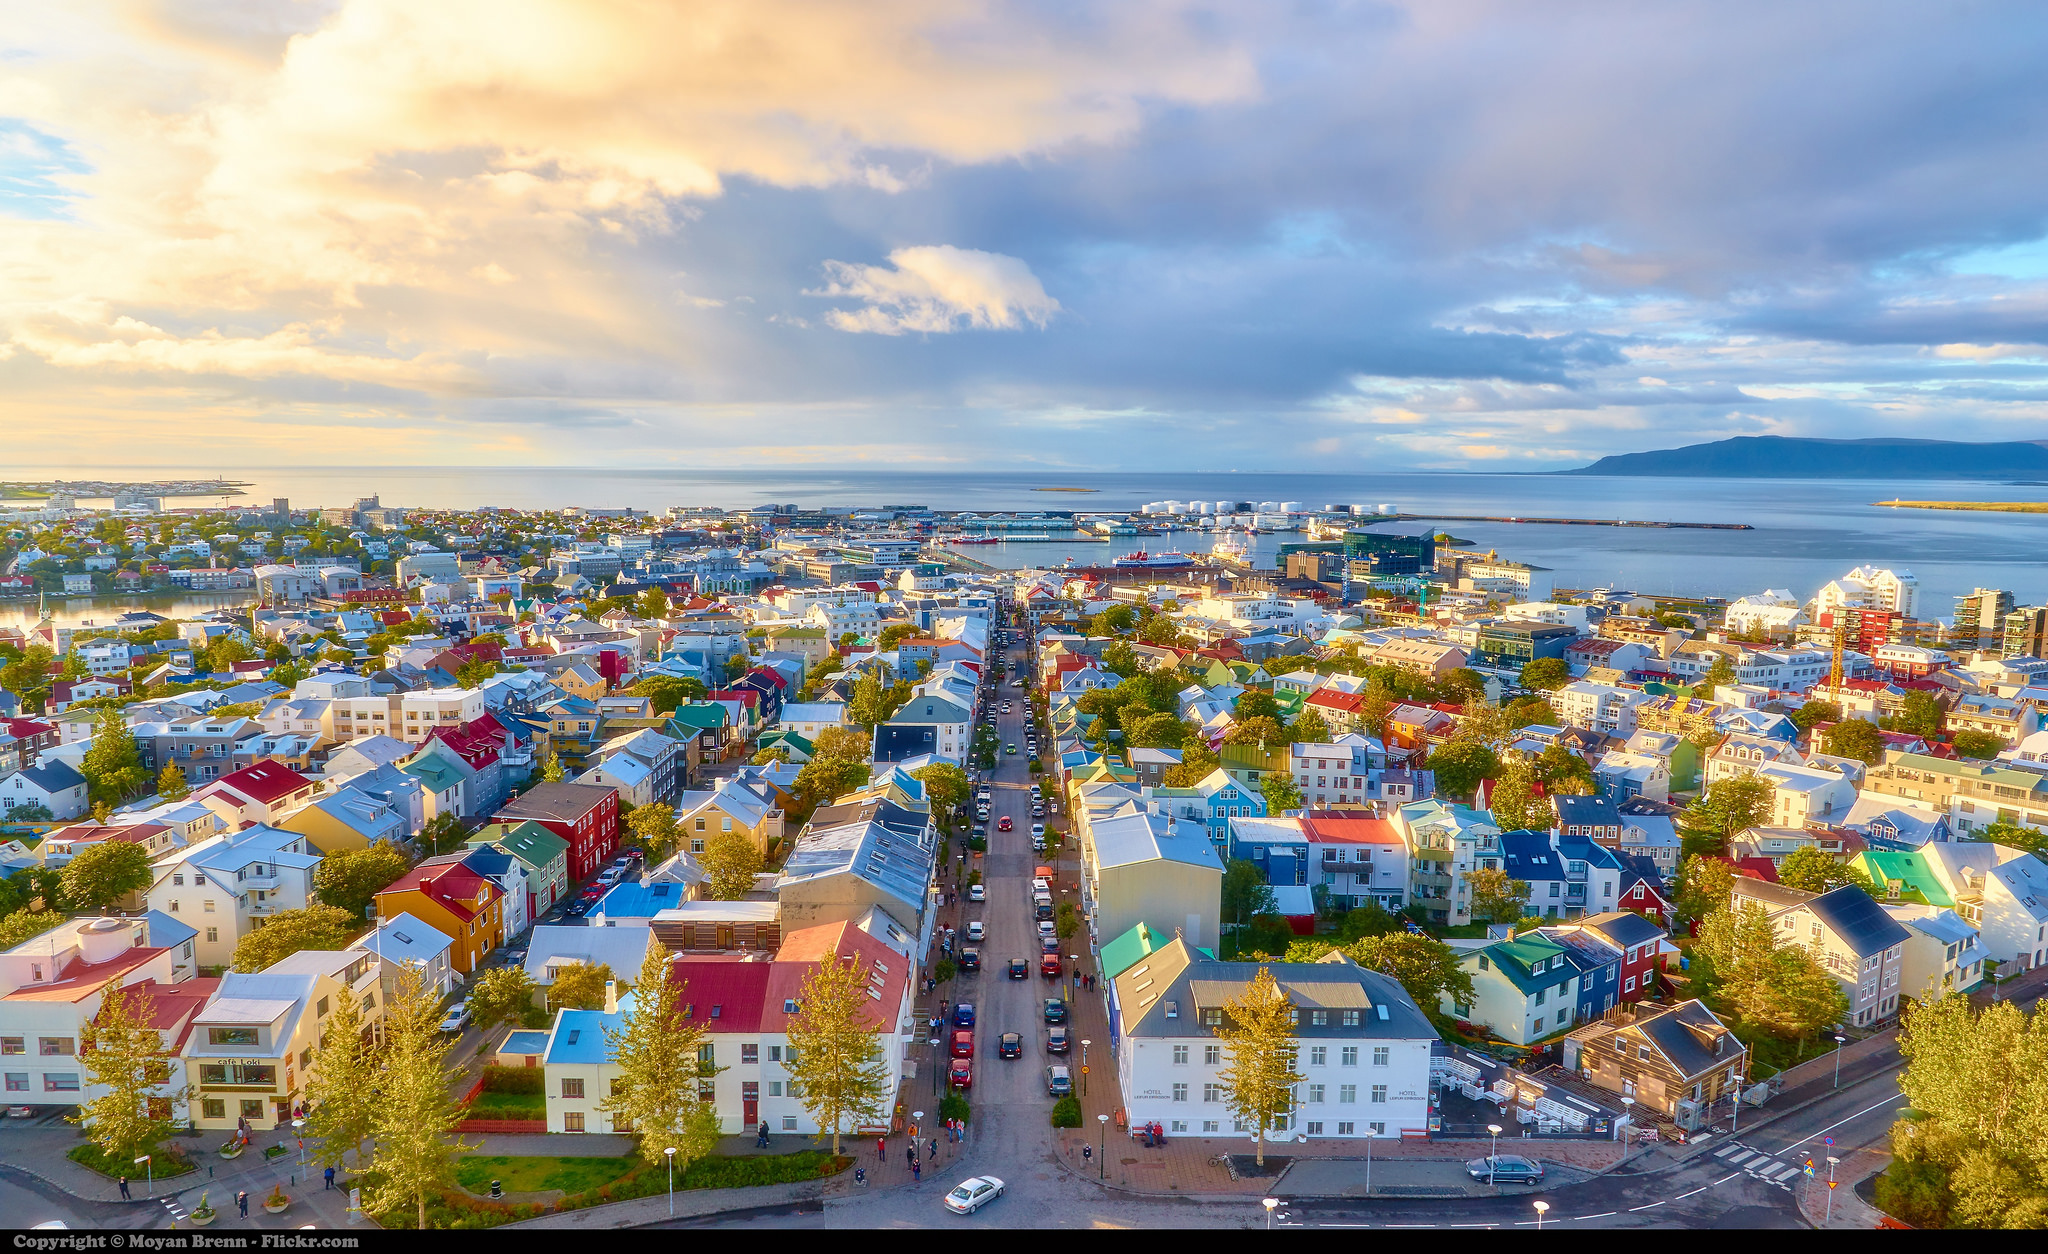 Breaking the Ice: Getting to Know Iceland